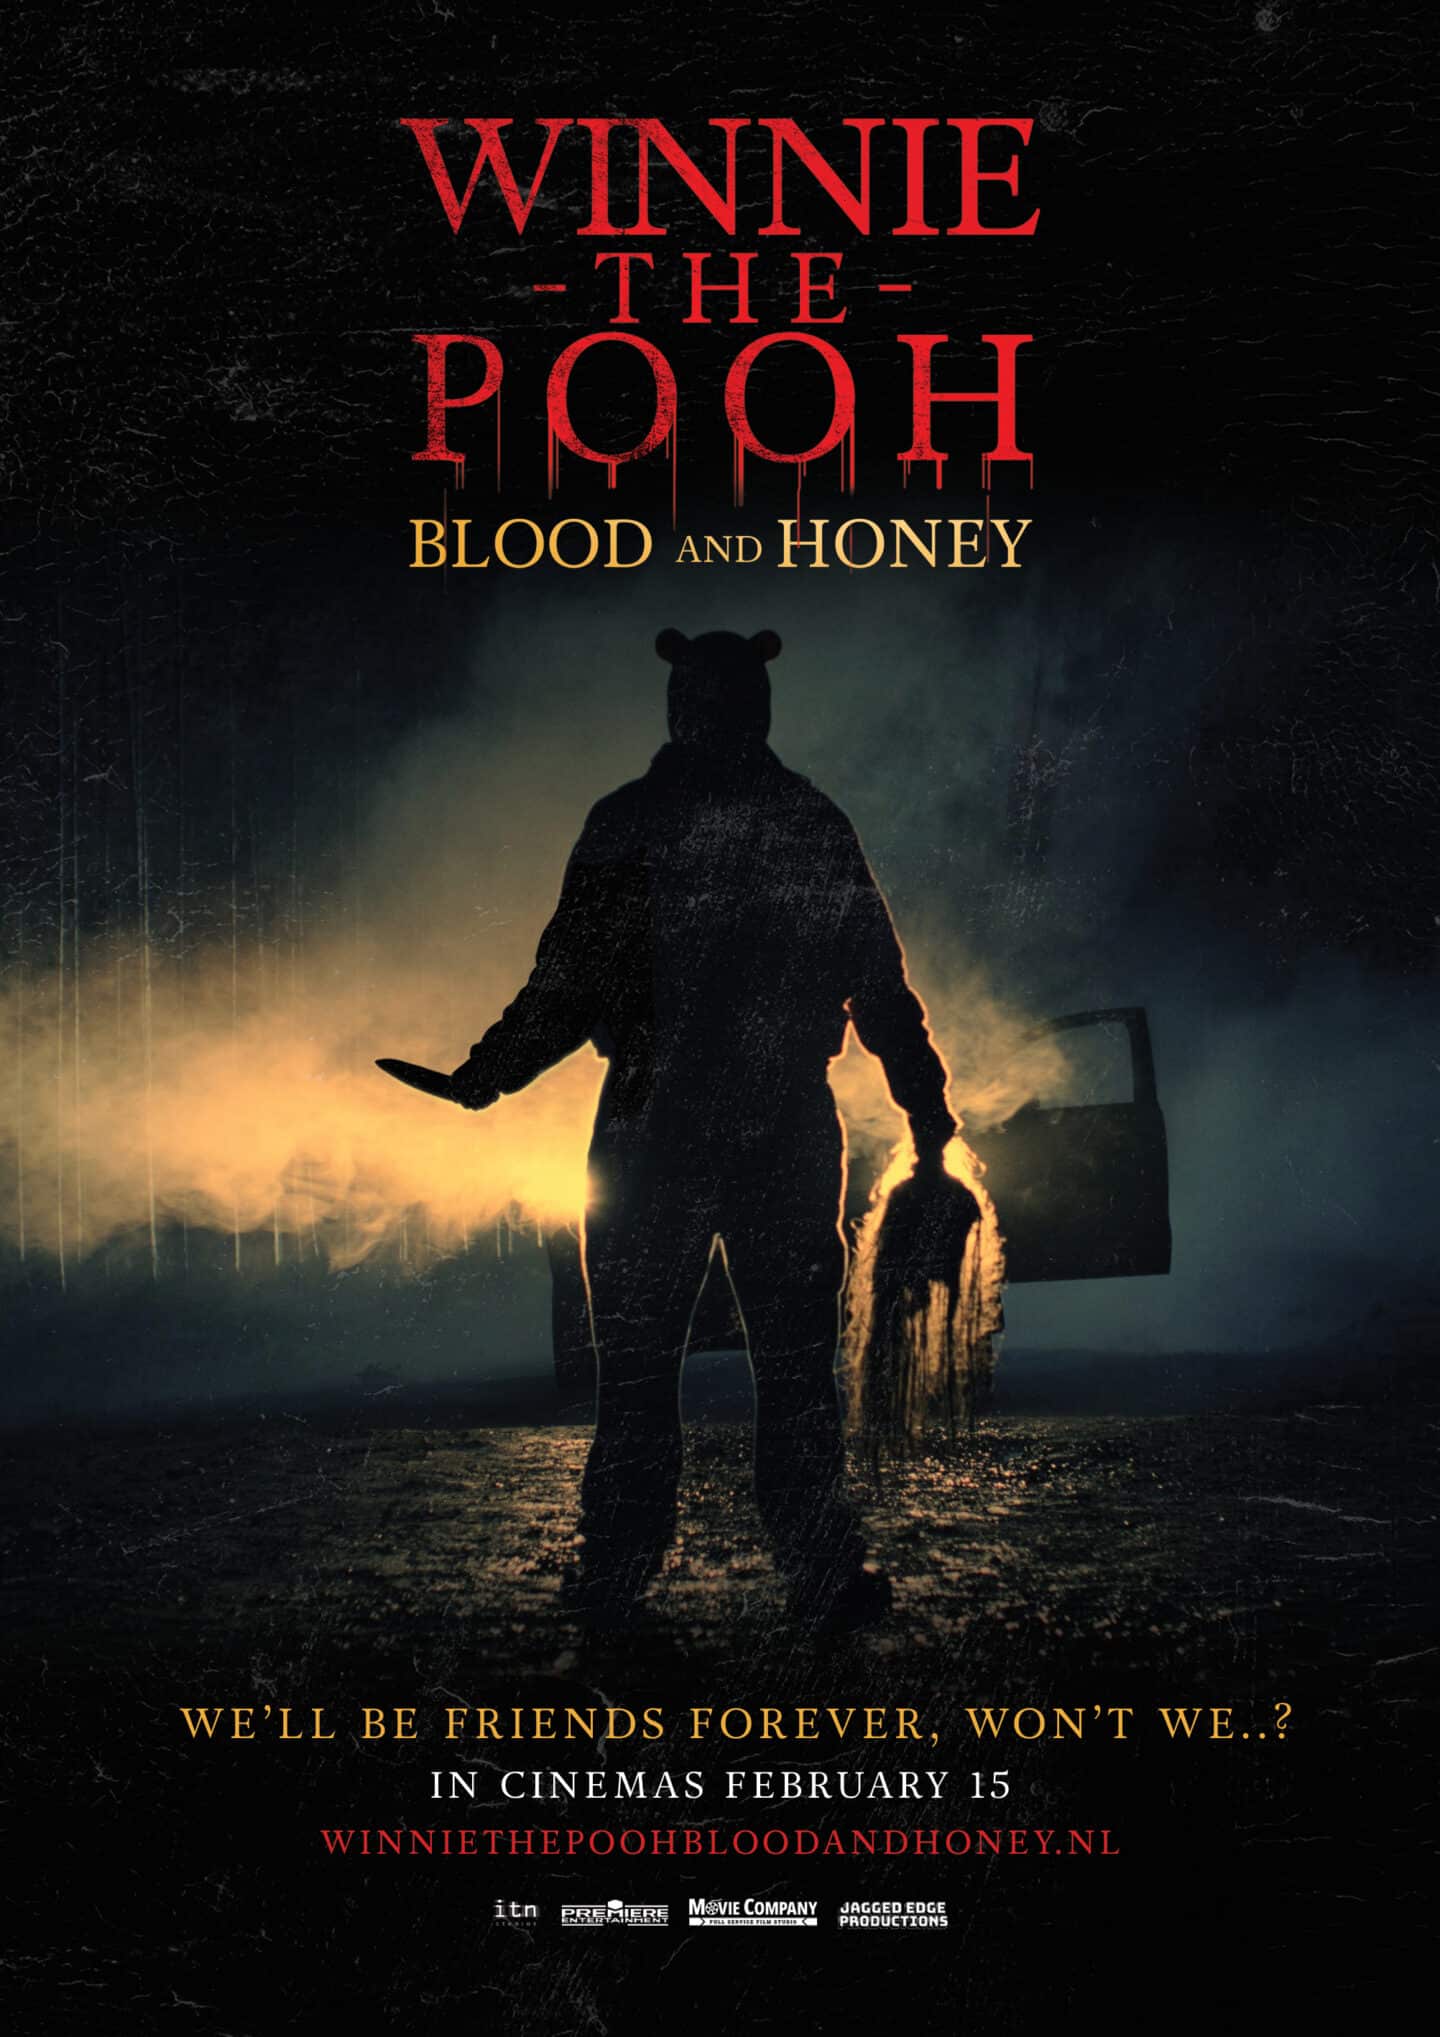 Winnie The Pooh Blood and Honey - Teaser Poster